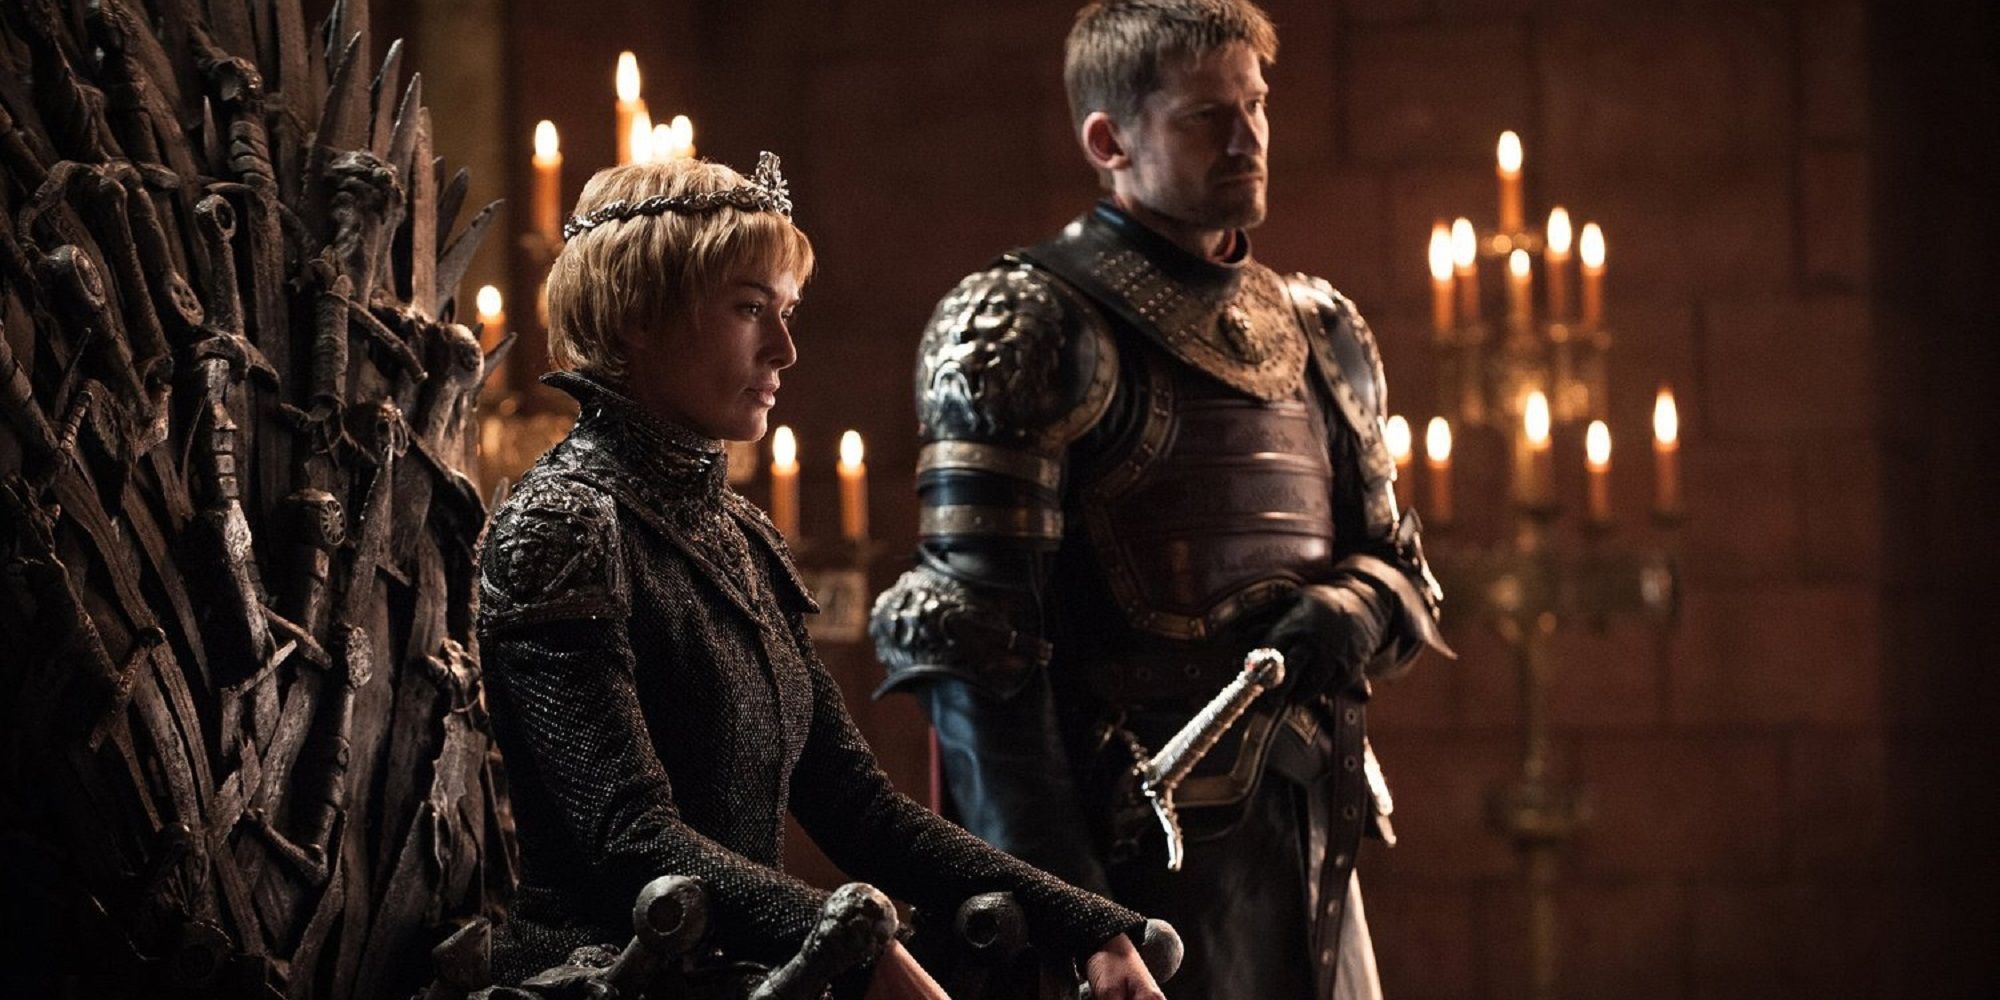 Cersei and Jaime Lannister at the Throne room in Game of Thrones.